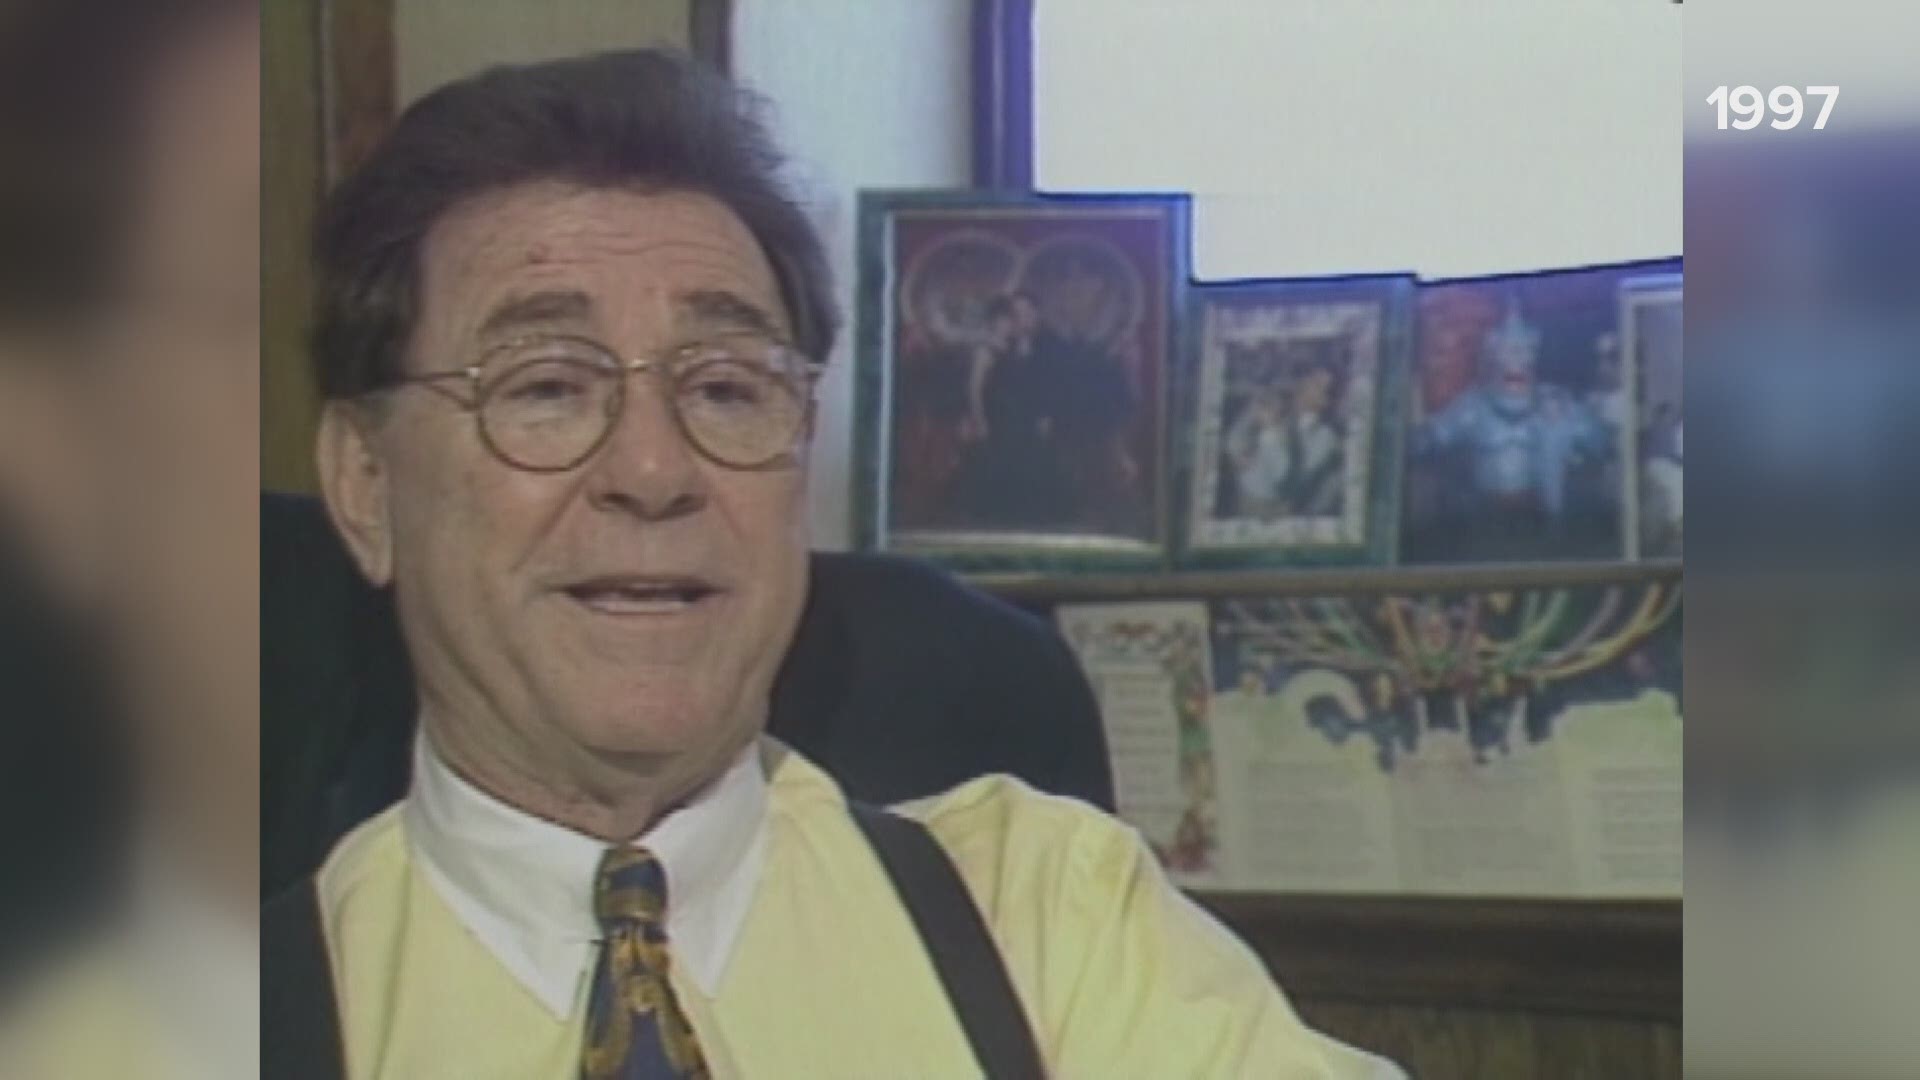 Former WWL-TV reporter Bill Capo dives into the life, personality and incredible achievements of Blaine Kern Sr., "Mr. Mardi Gras," in this 1997 exclusive feature!